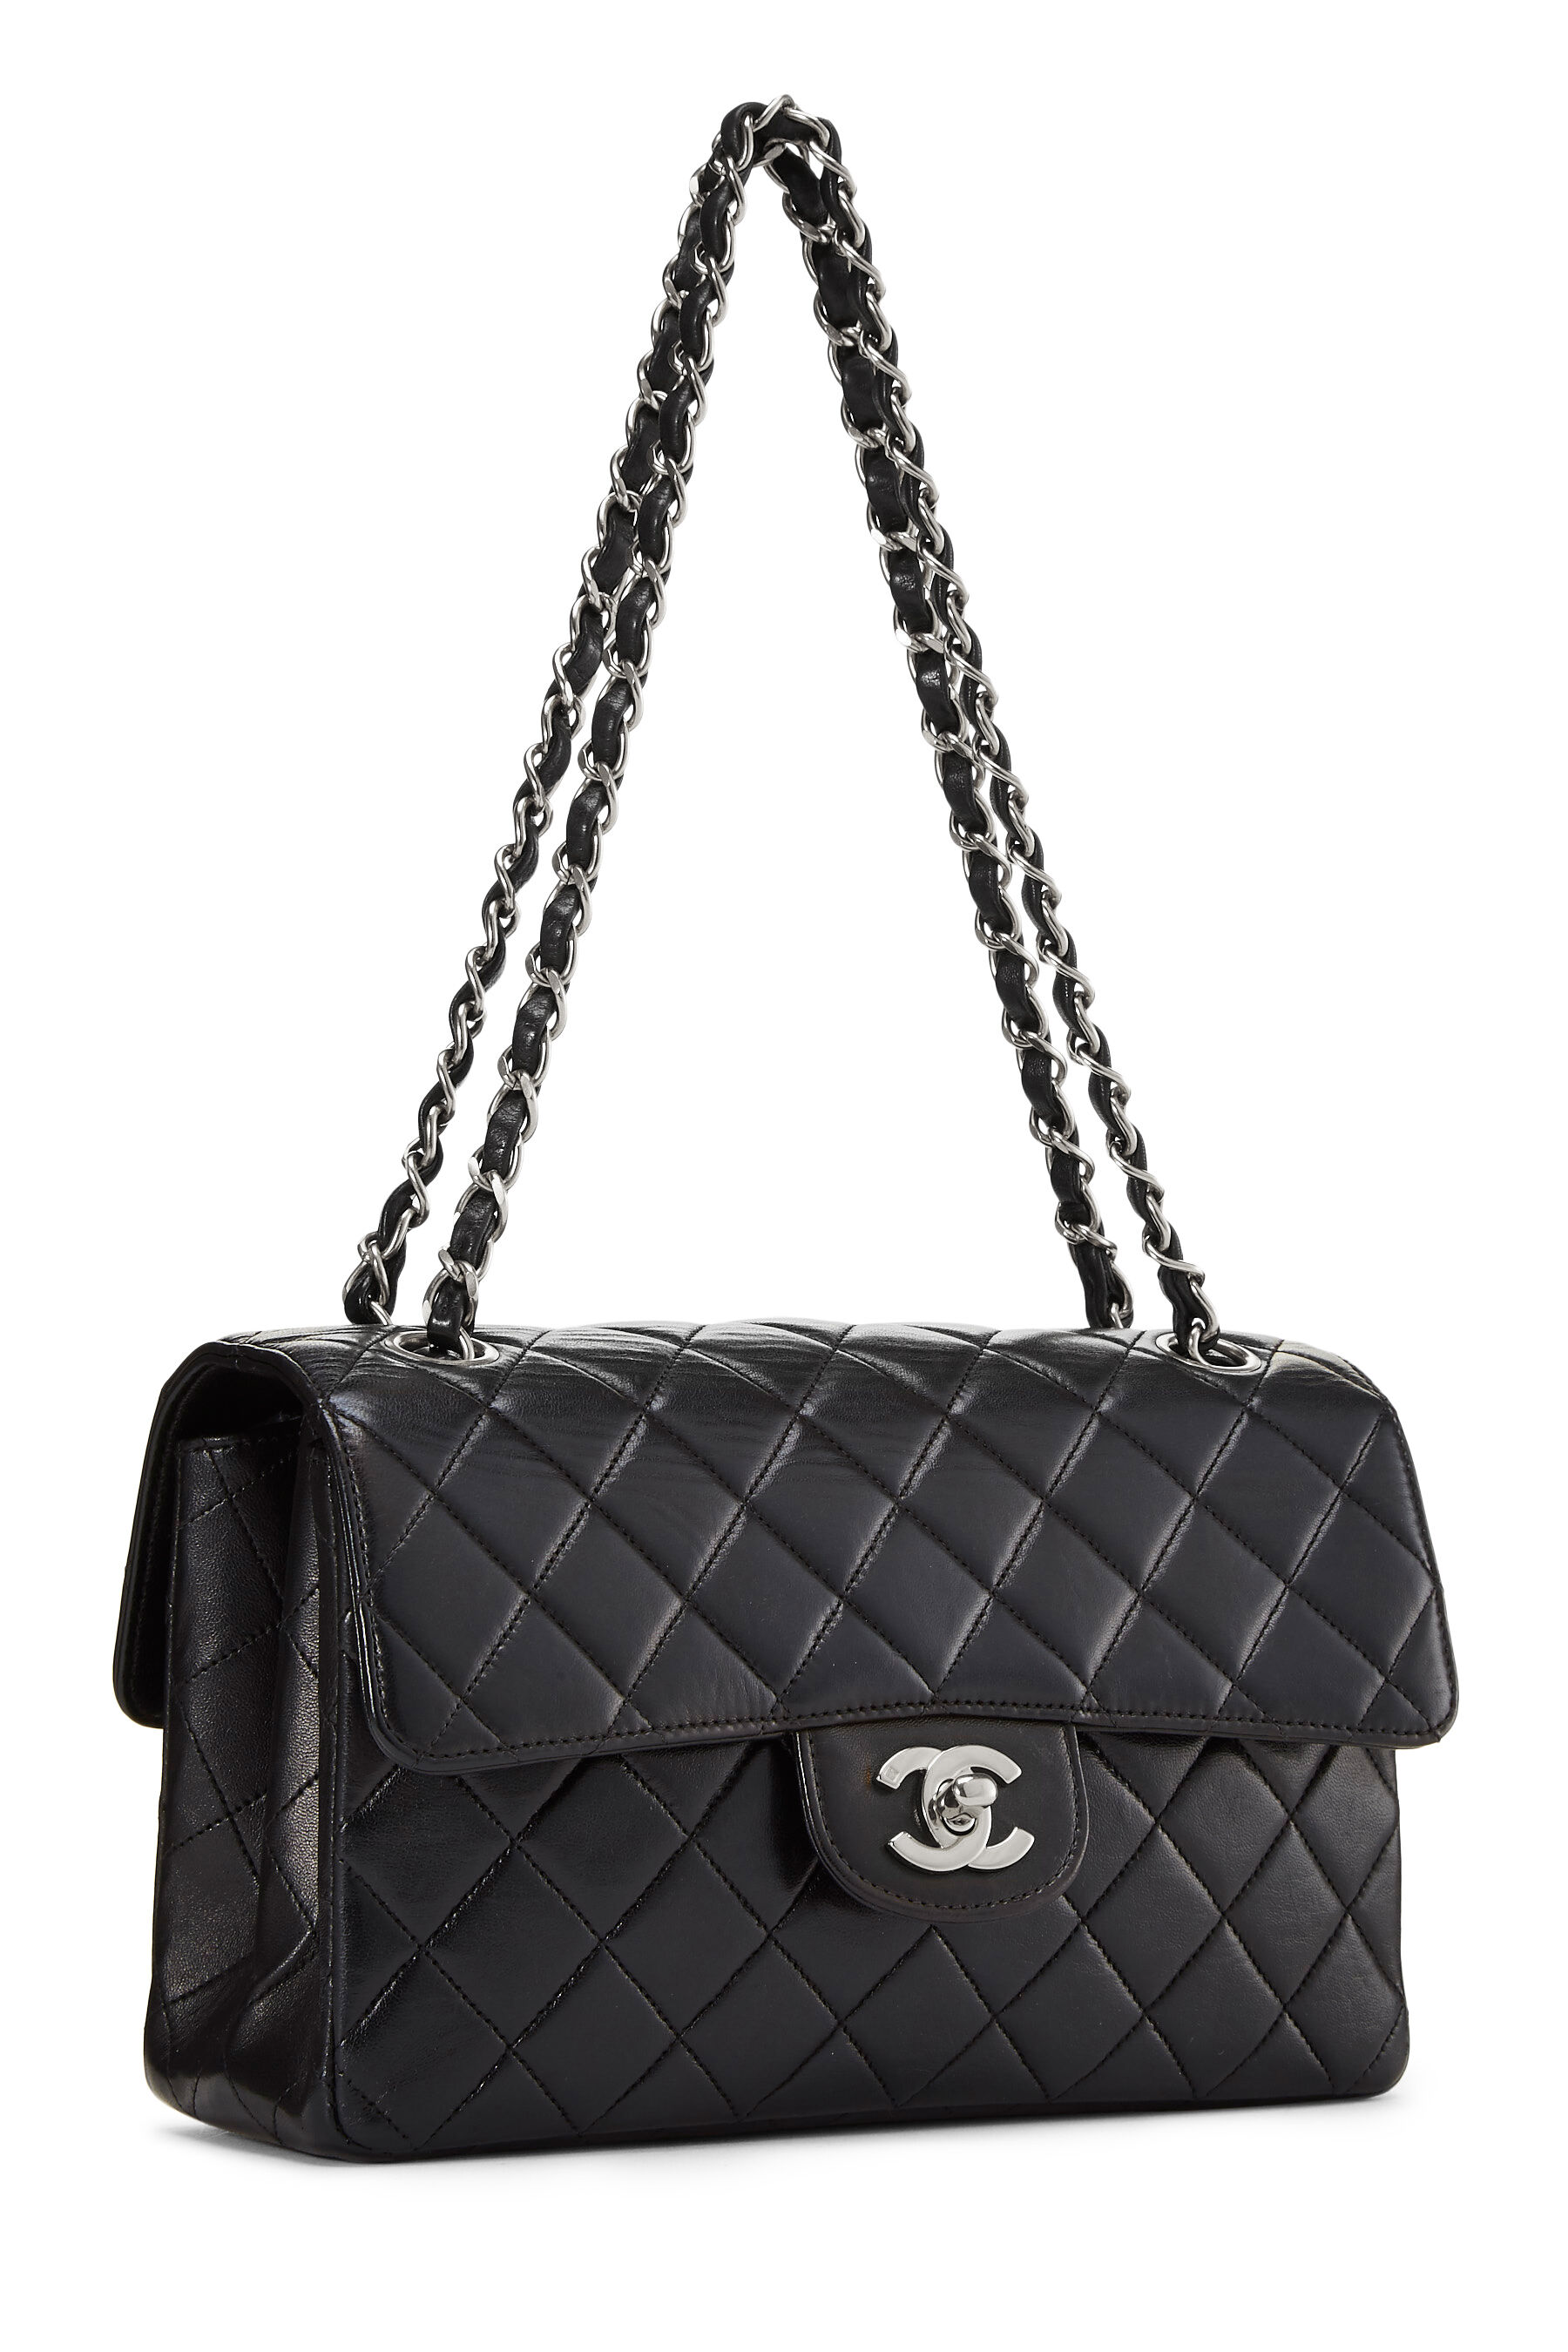 Chanel Black Quilted Lambskin Double Sided Flap Small Q6B0N91IK1008